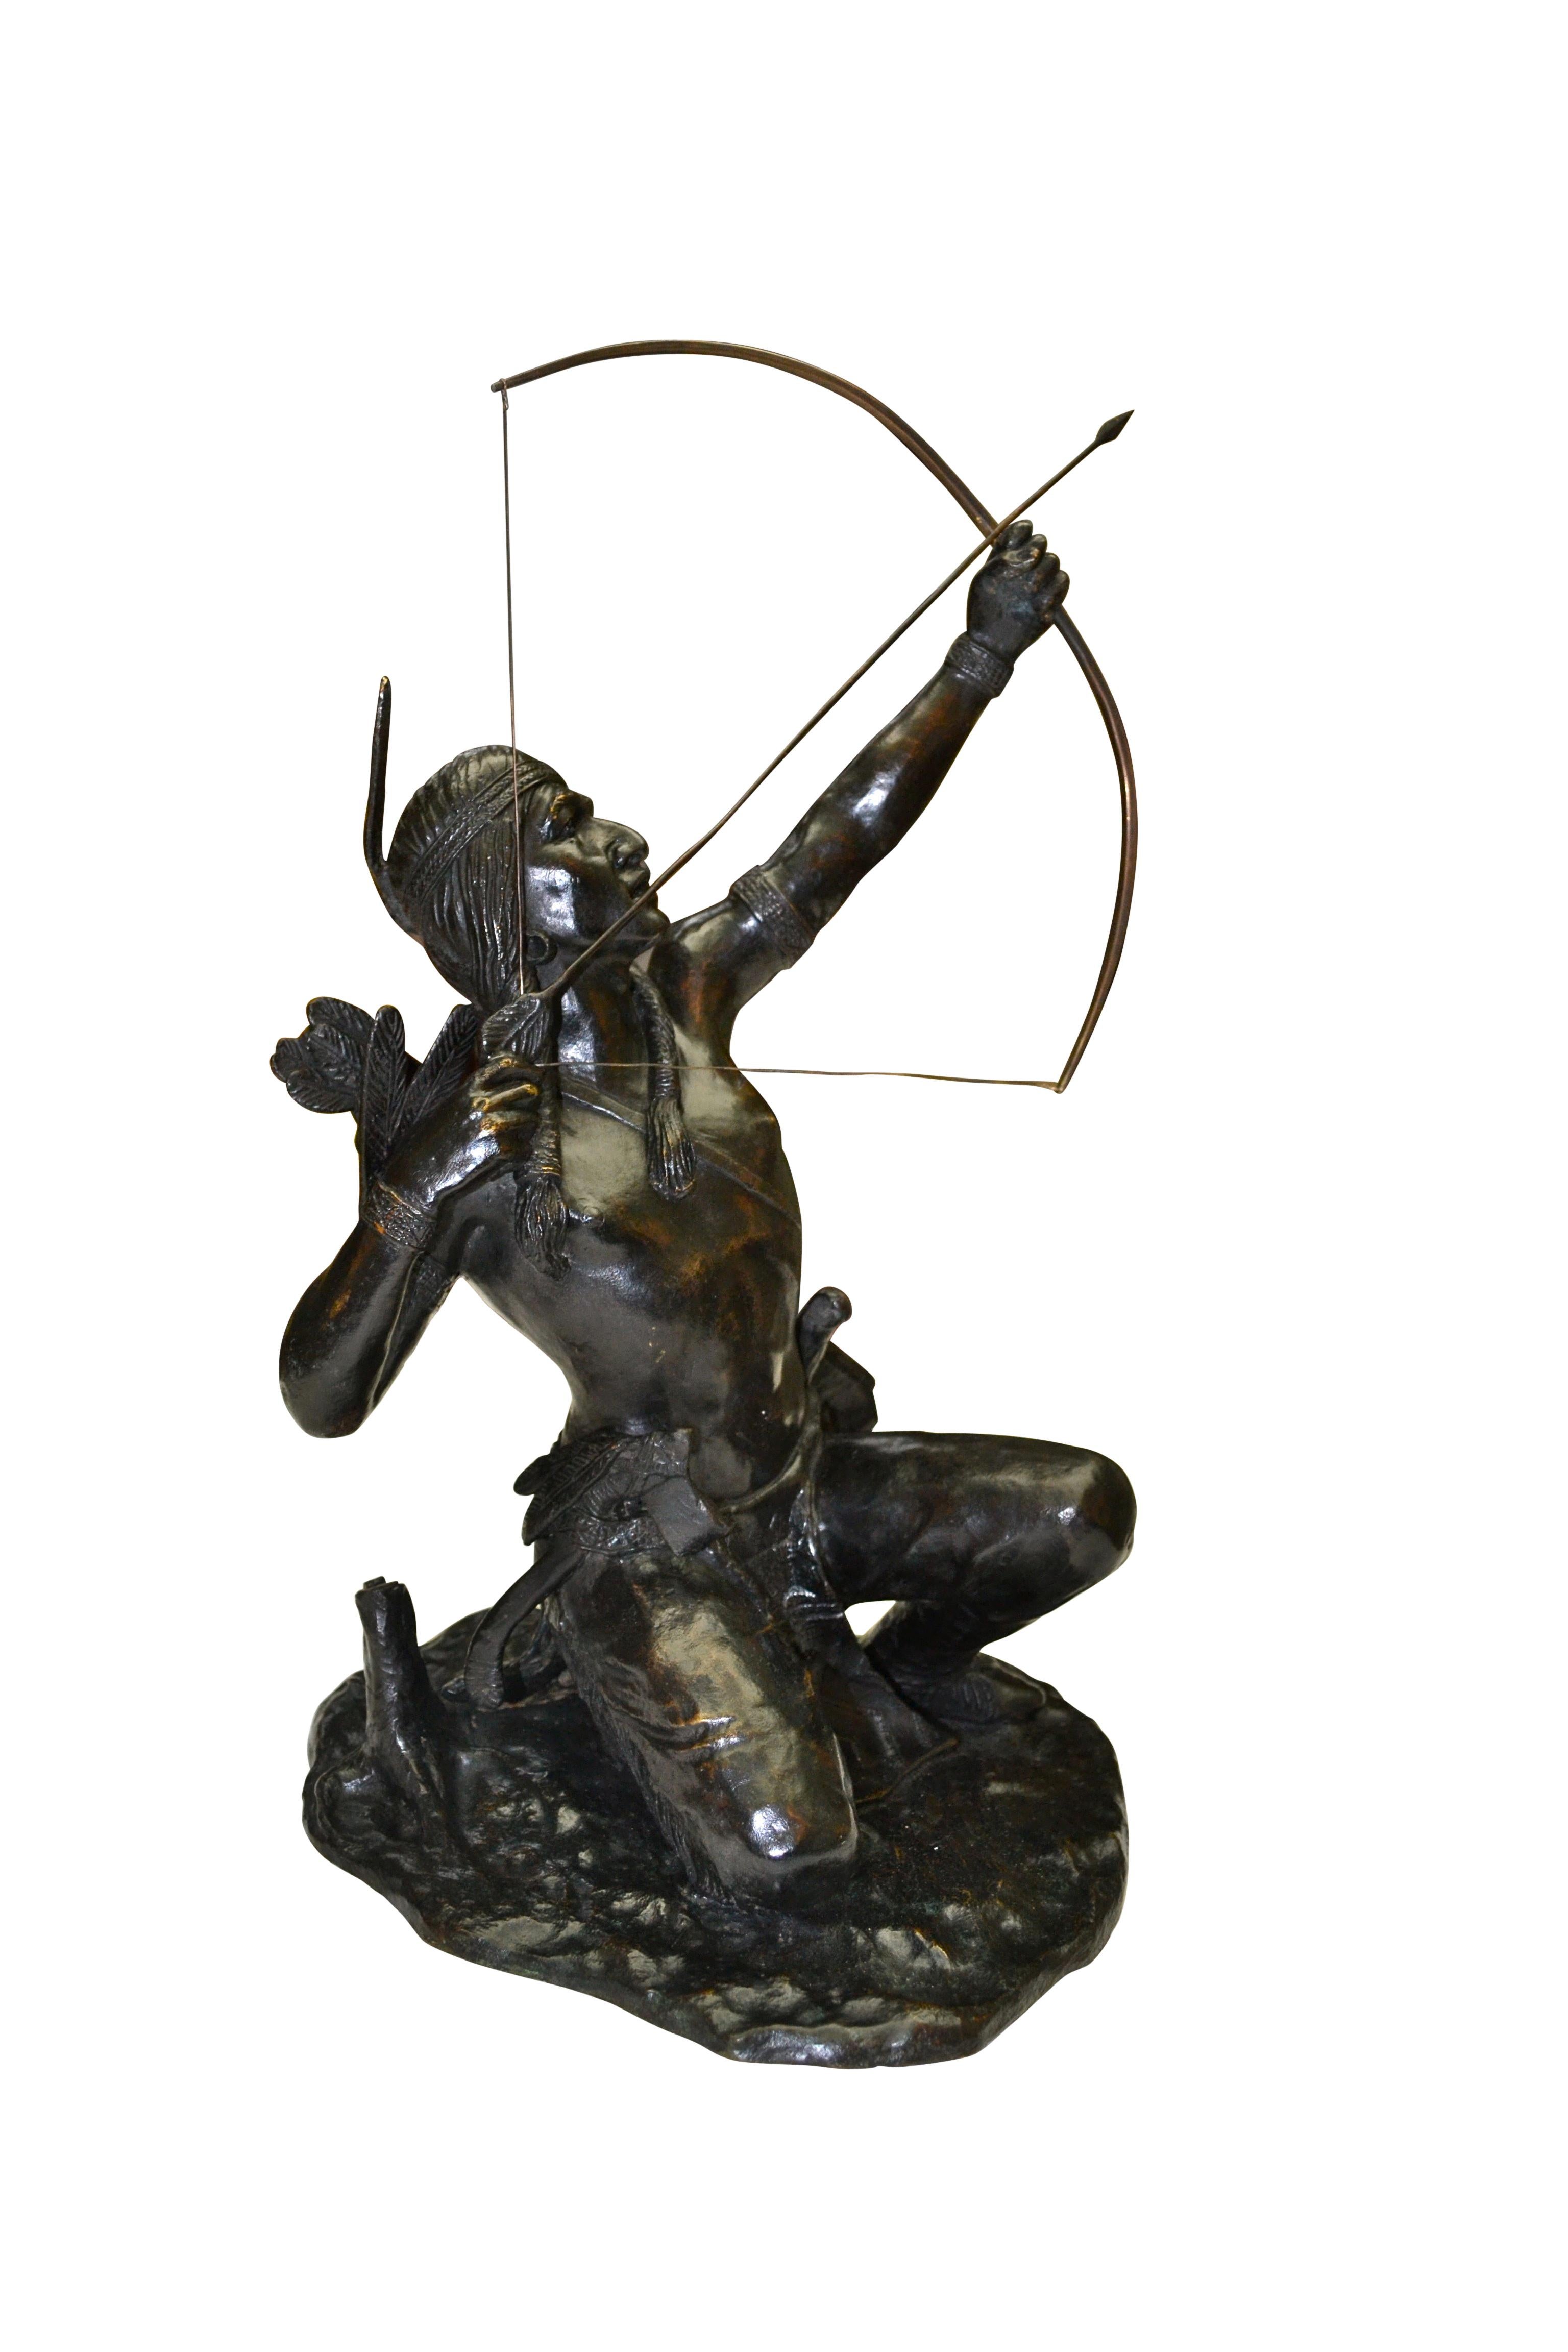 Rare Patinated Bronze Statue of a Native American Indian Archer on the Hunt In Good Condition For Sale In Vancouver, British Columbia